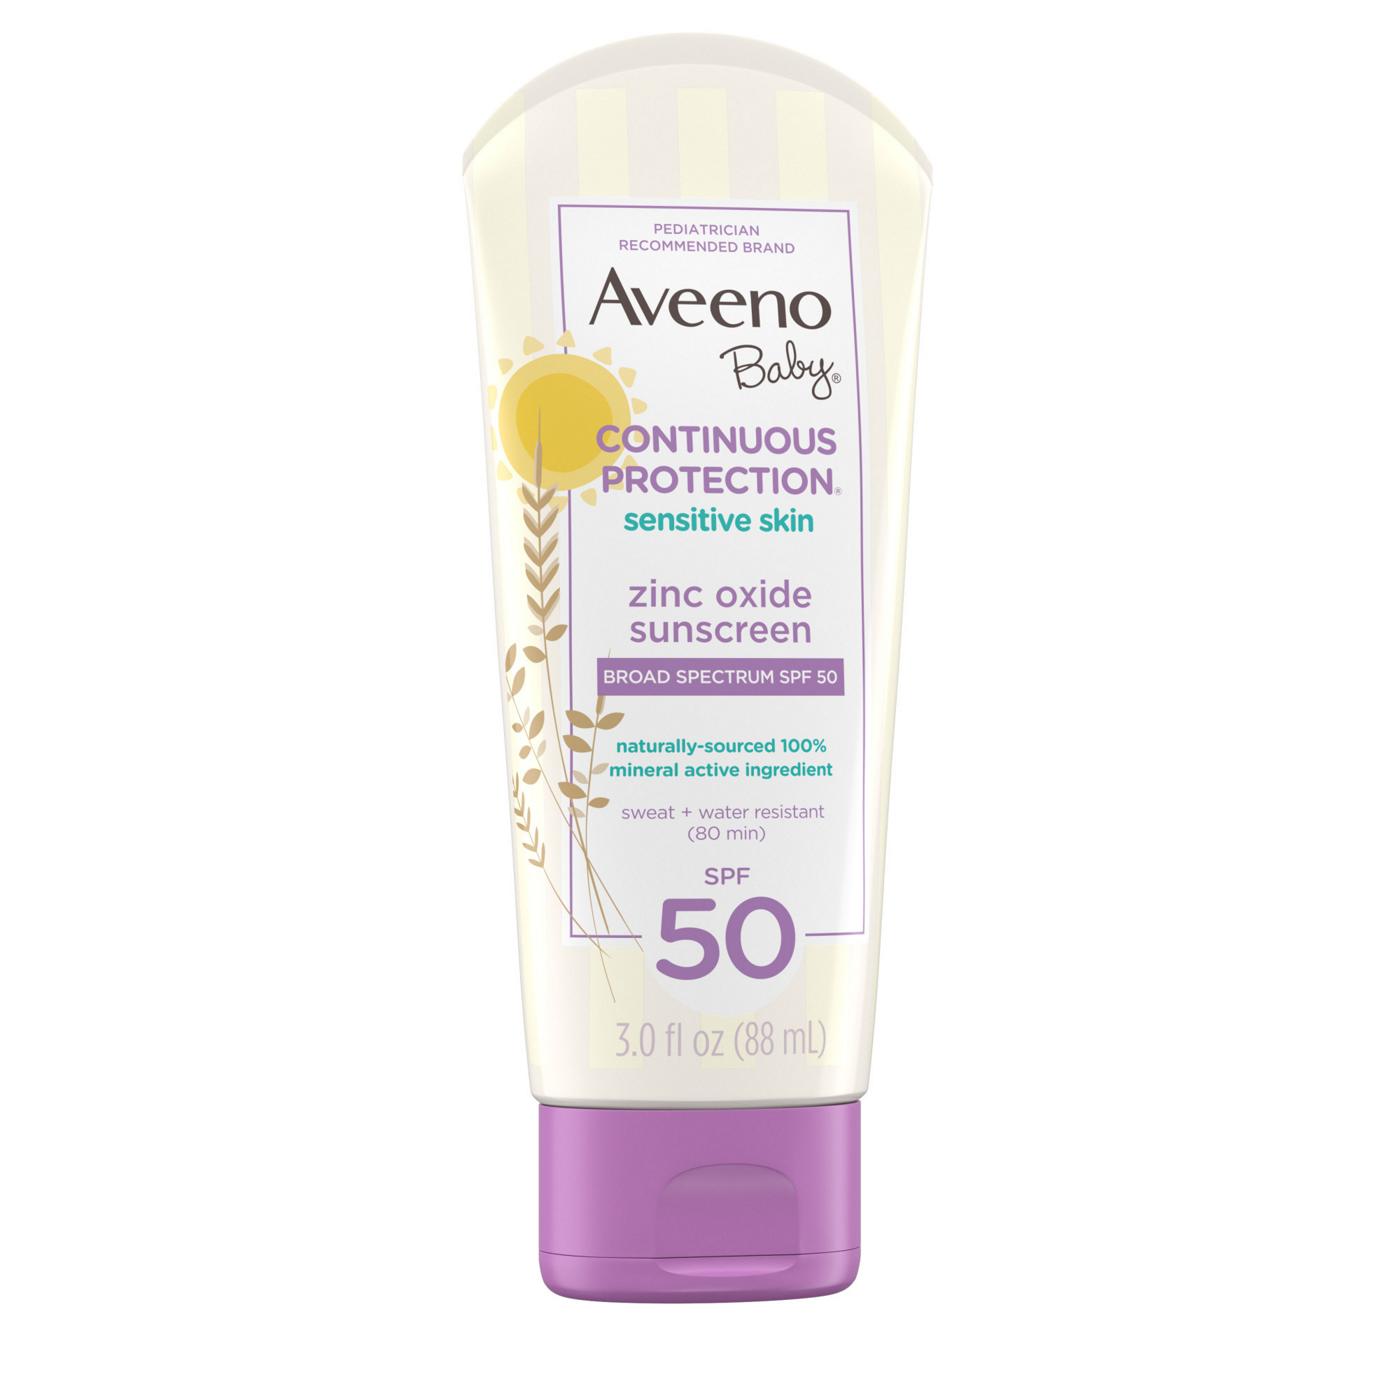 Aveeno Baby Continuous Protection Sensitive Skin Lotion Zinc Oxide Sunscreen With Broad Spectrum SPF 50; image 7 of 8